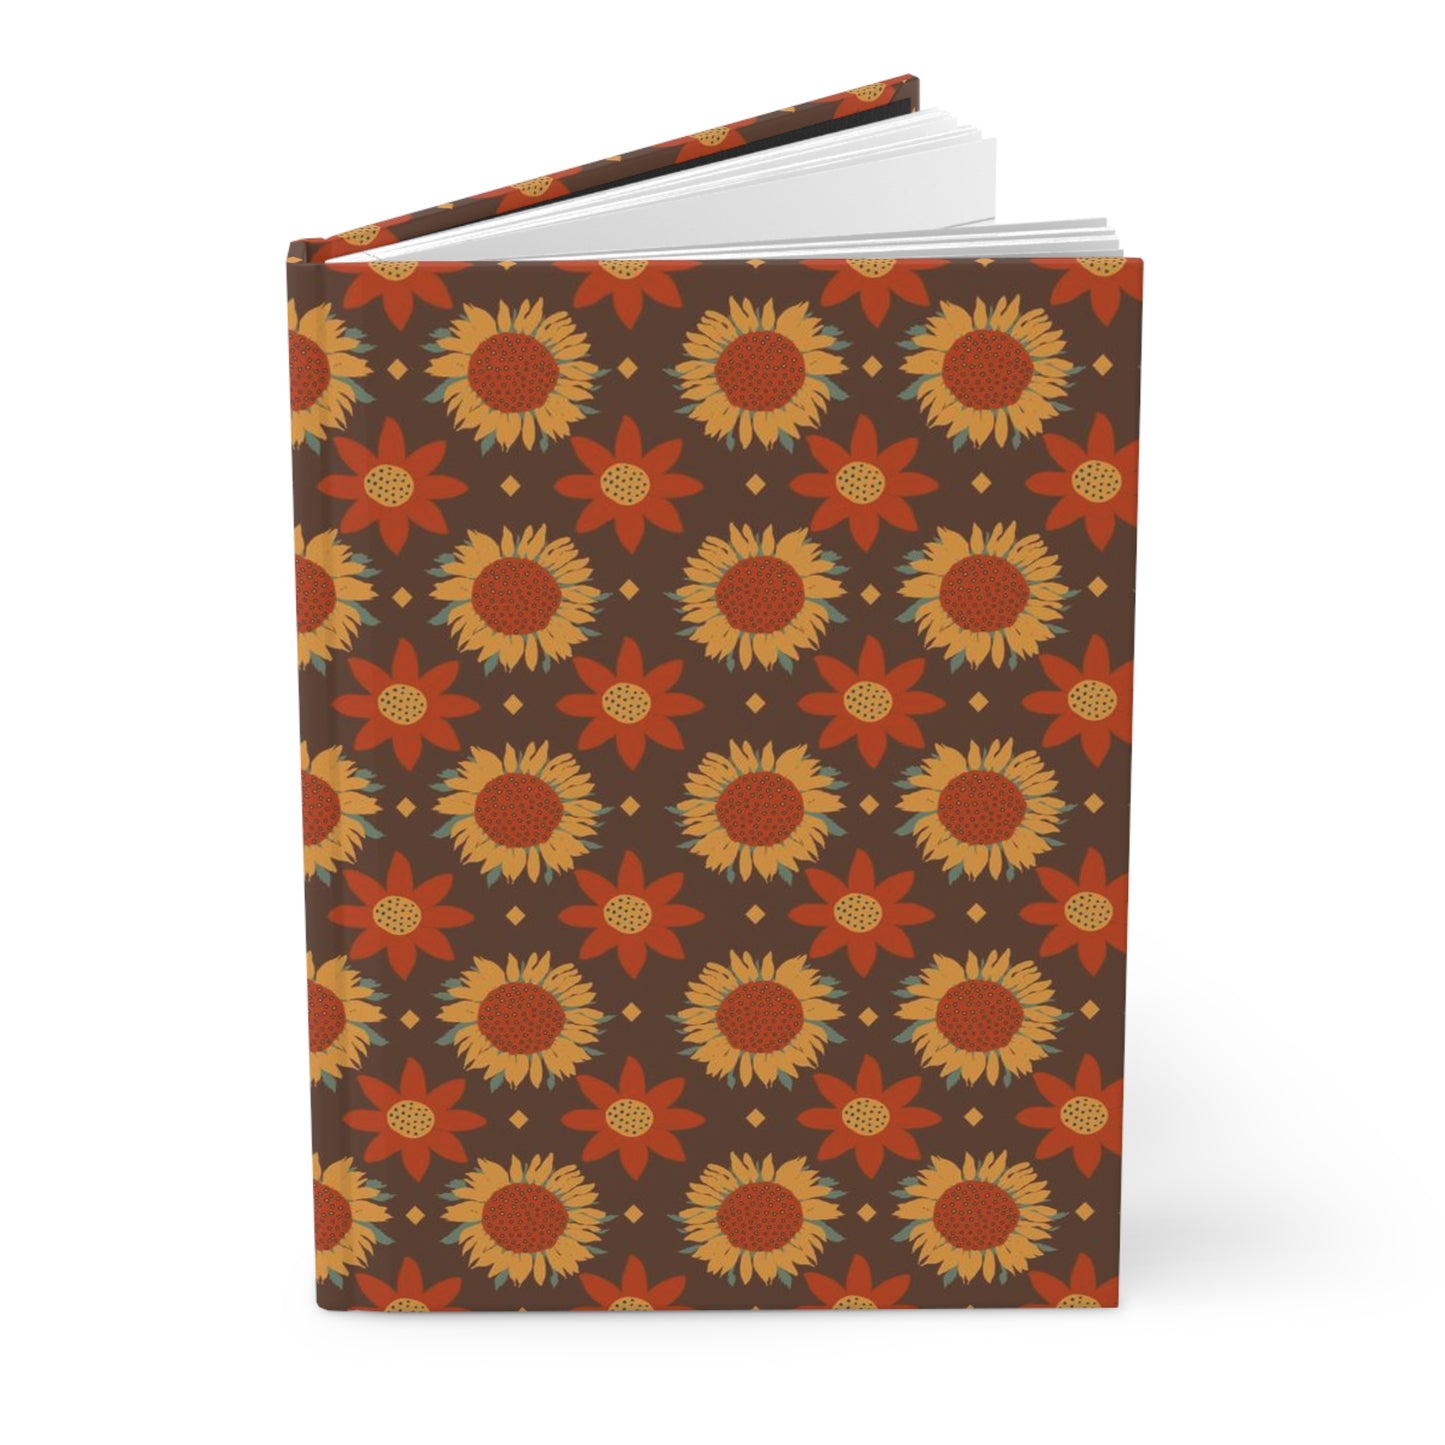 Retro Gold Sunflowers on Brown Background Hardcover Journal Matte